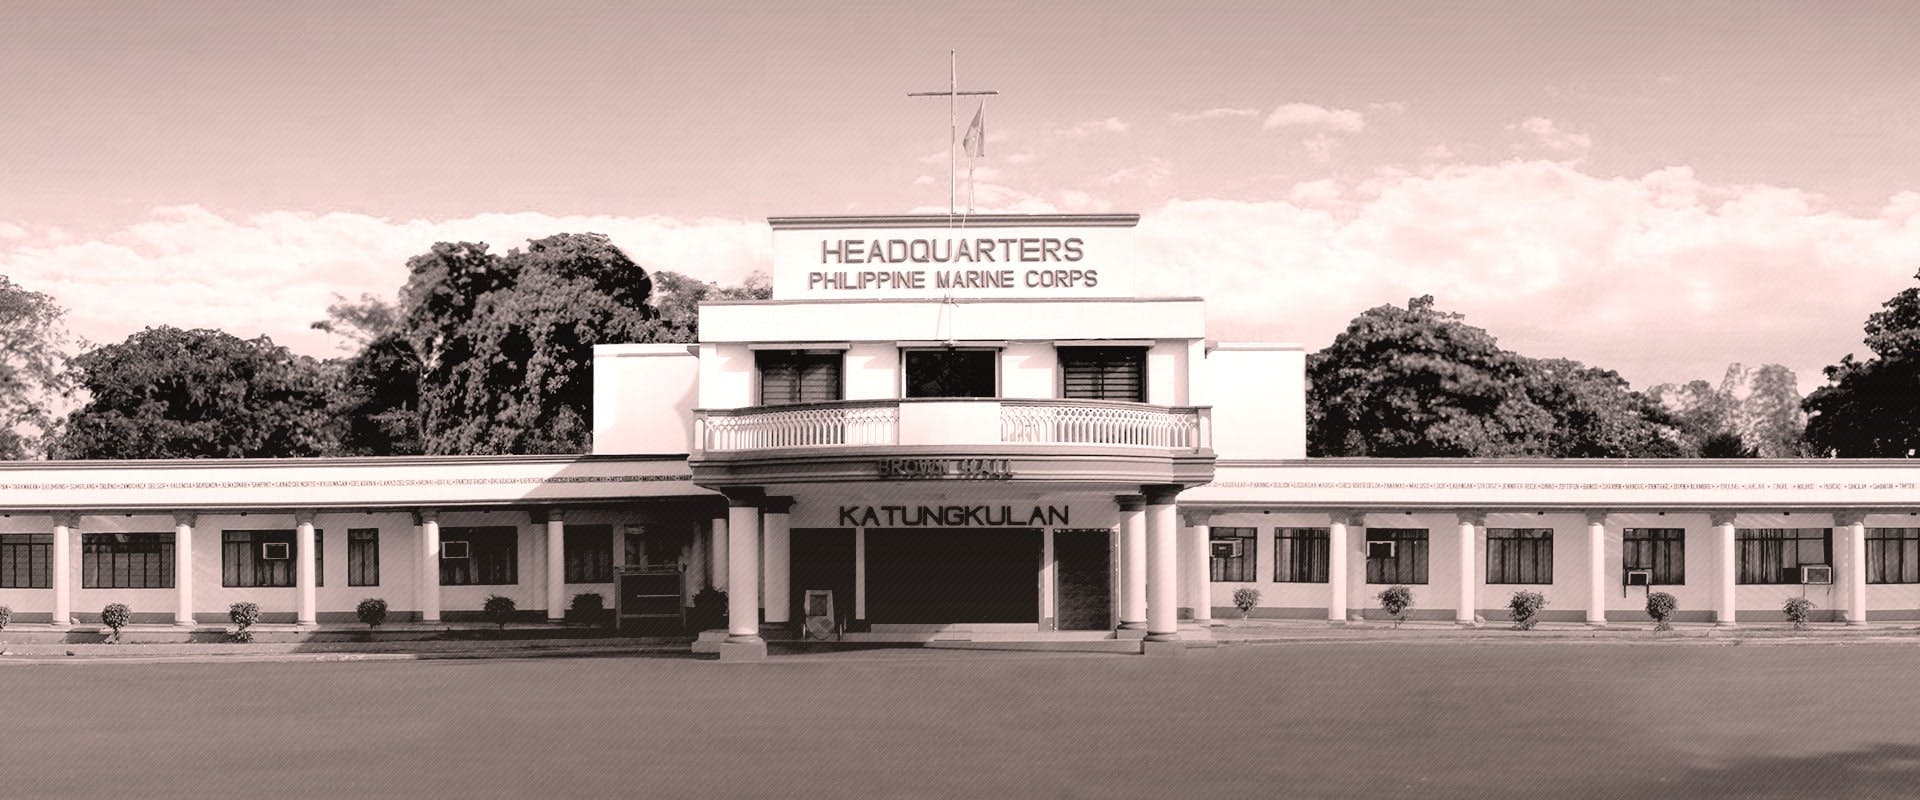 Image of Headquarters Philippine Marine Corps building. With a tagline of 'KATUNGKULAN'